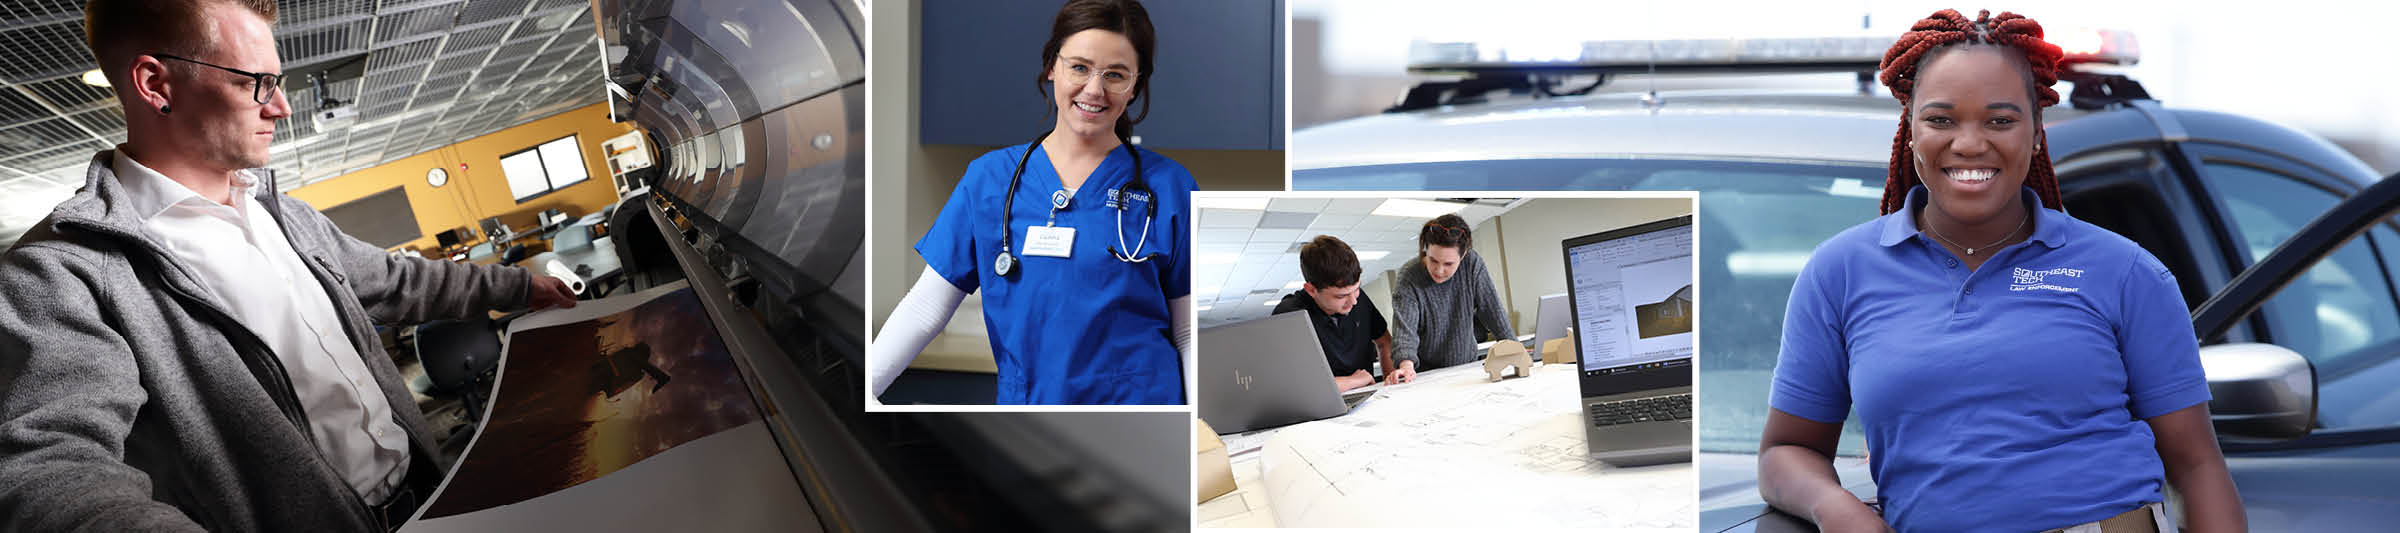 4 image collage: male student at large format printer, brown-haired girl in nursing scrubs, two students looking over architectural drawings, law enforcement student near student patrol vehicle